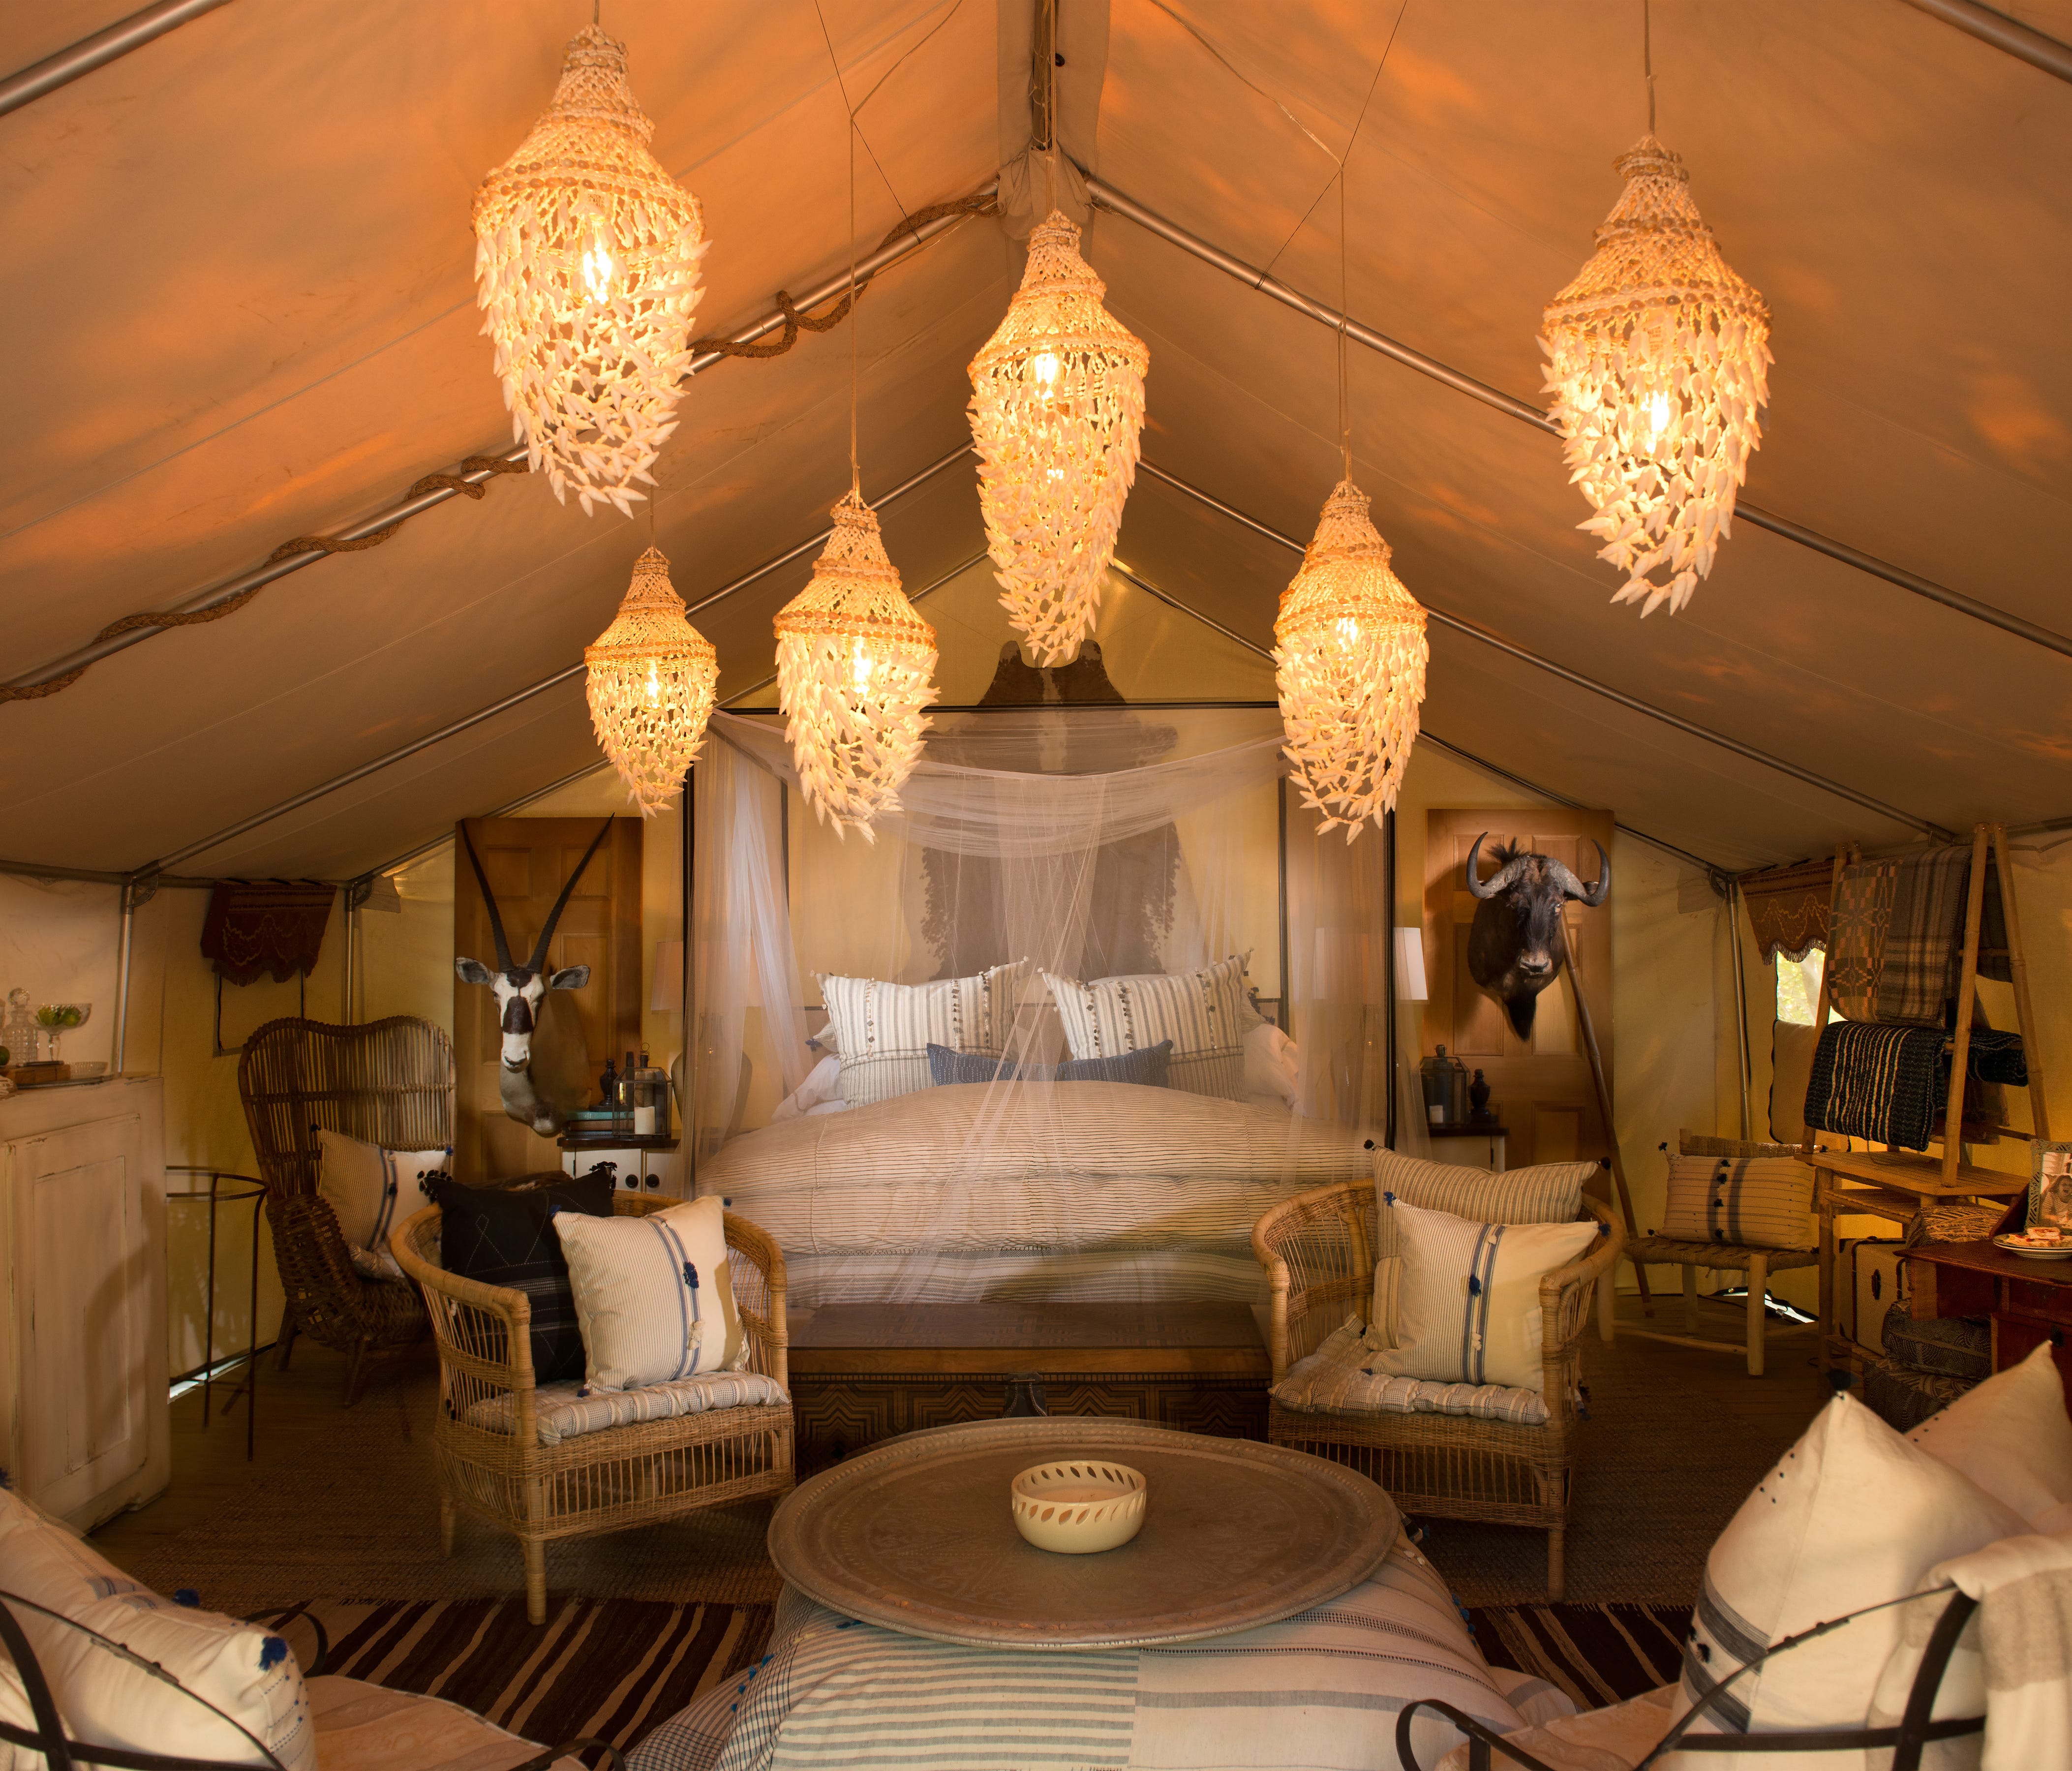 Four safari-style glamping tents were also added to the Sandy Pines Campground this season. Pictured here, Blixen's Oasis.